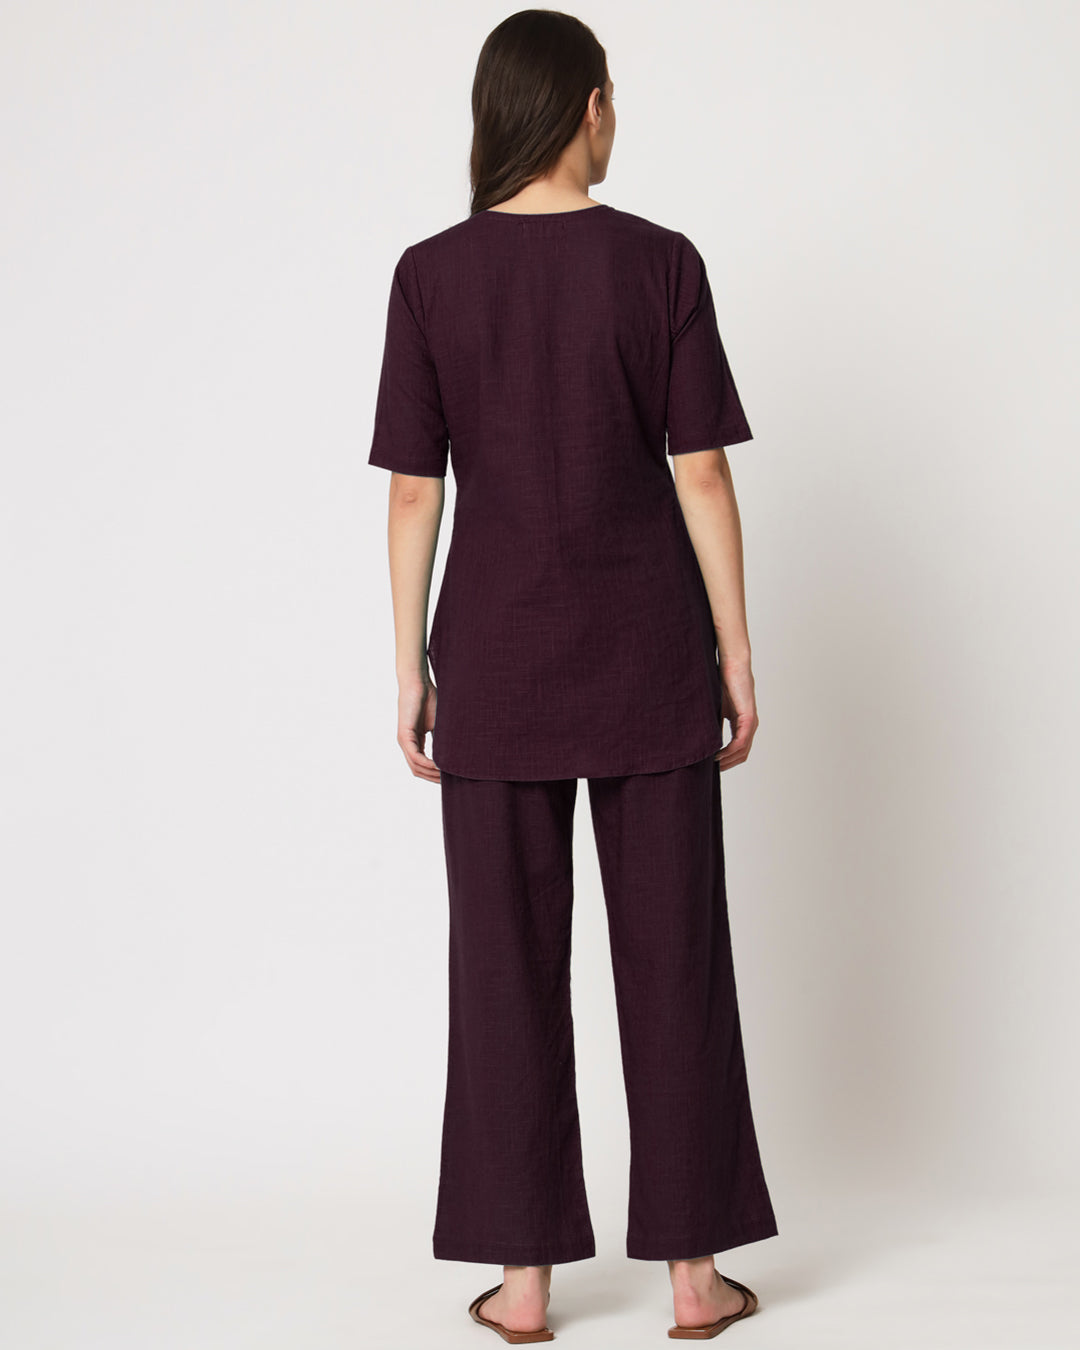 Plum Passion Collar Neck Short Length Solid Co-ord Set